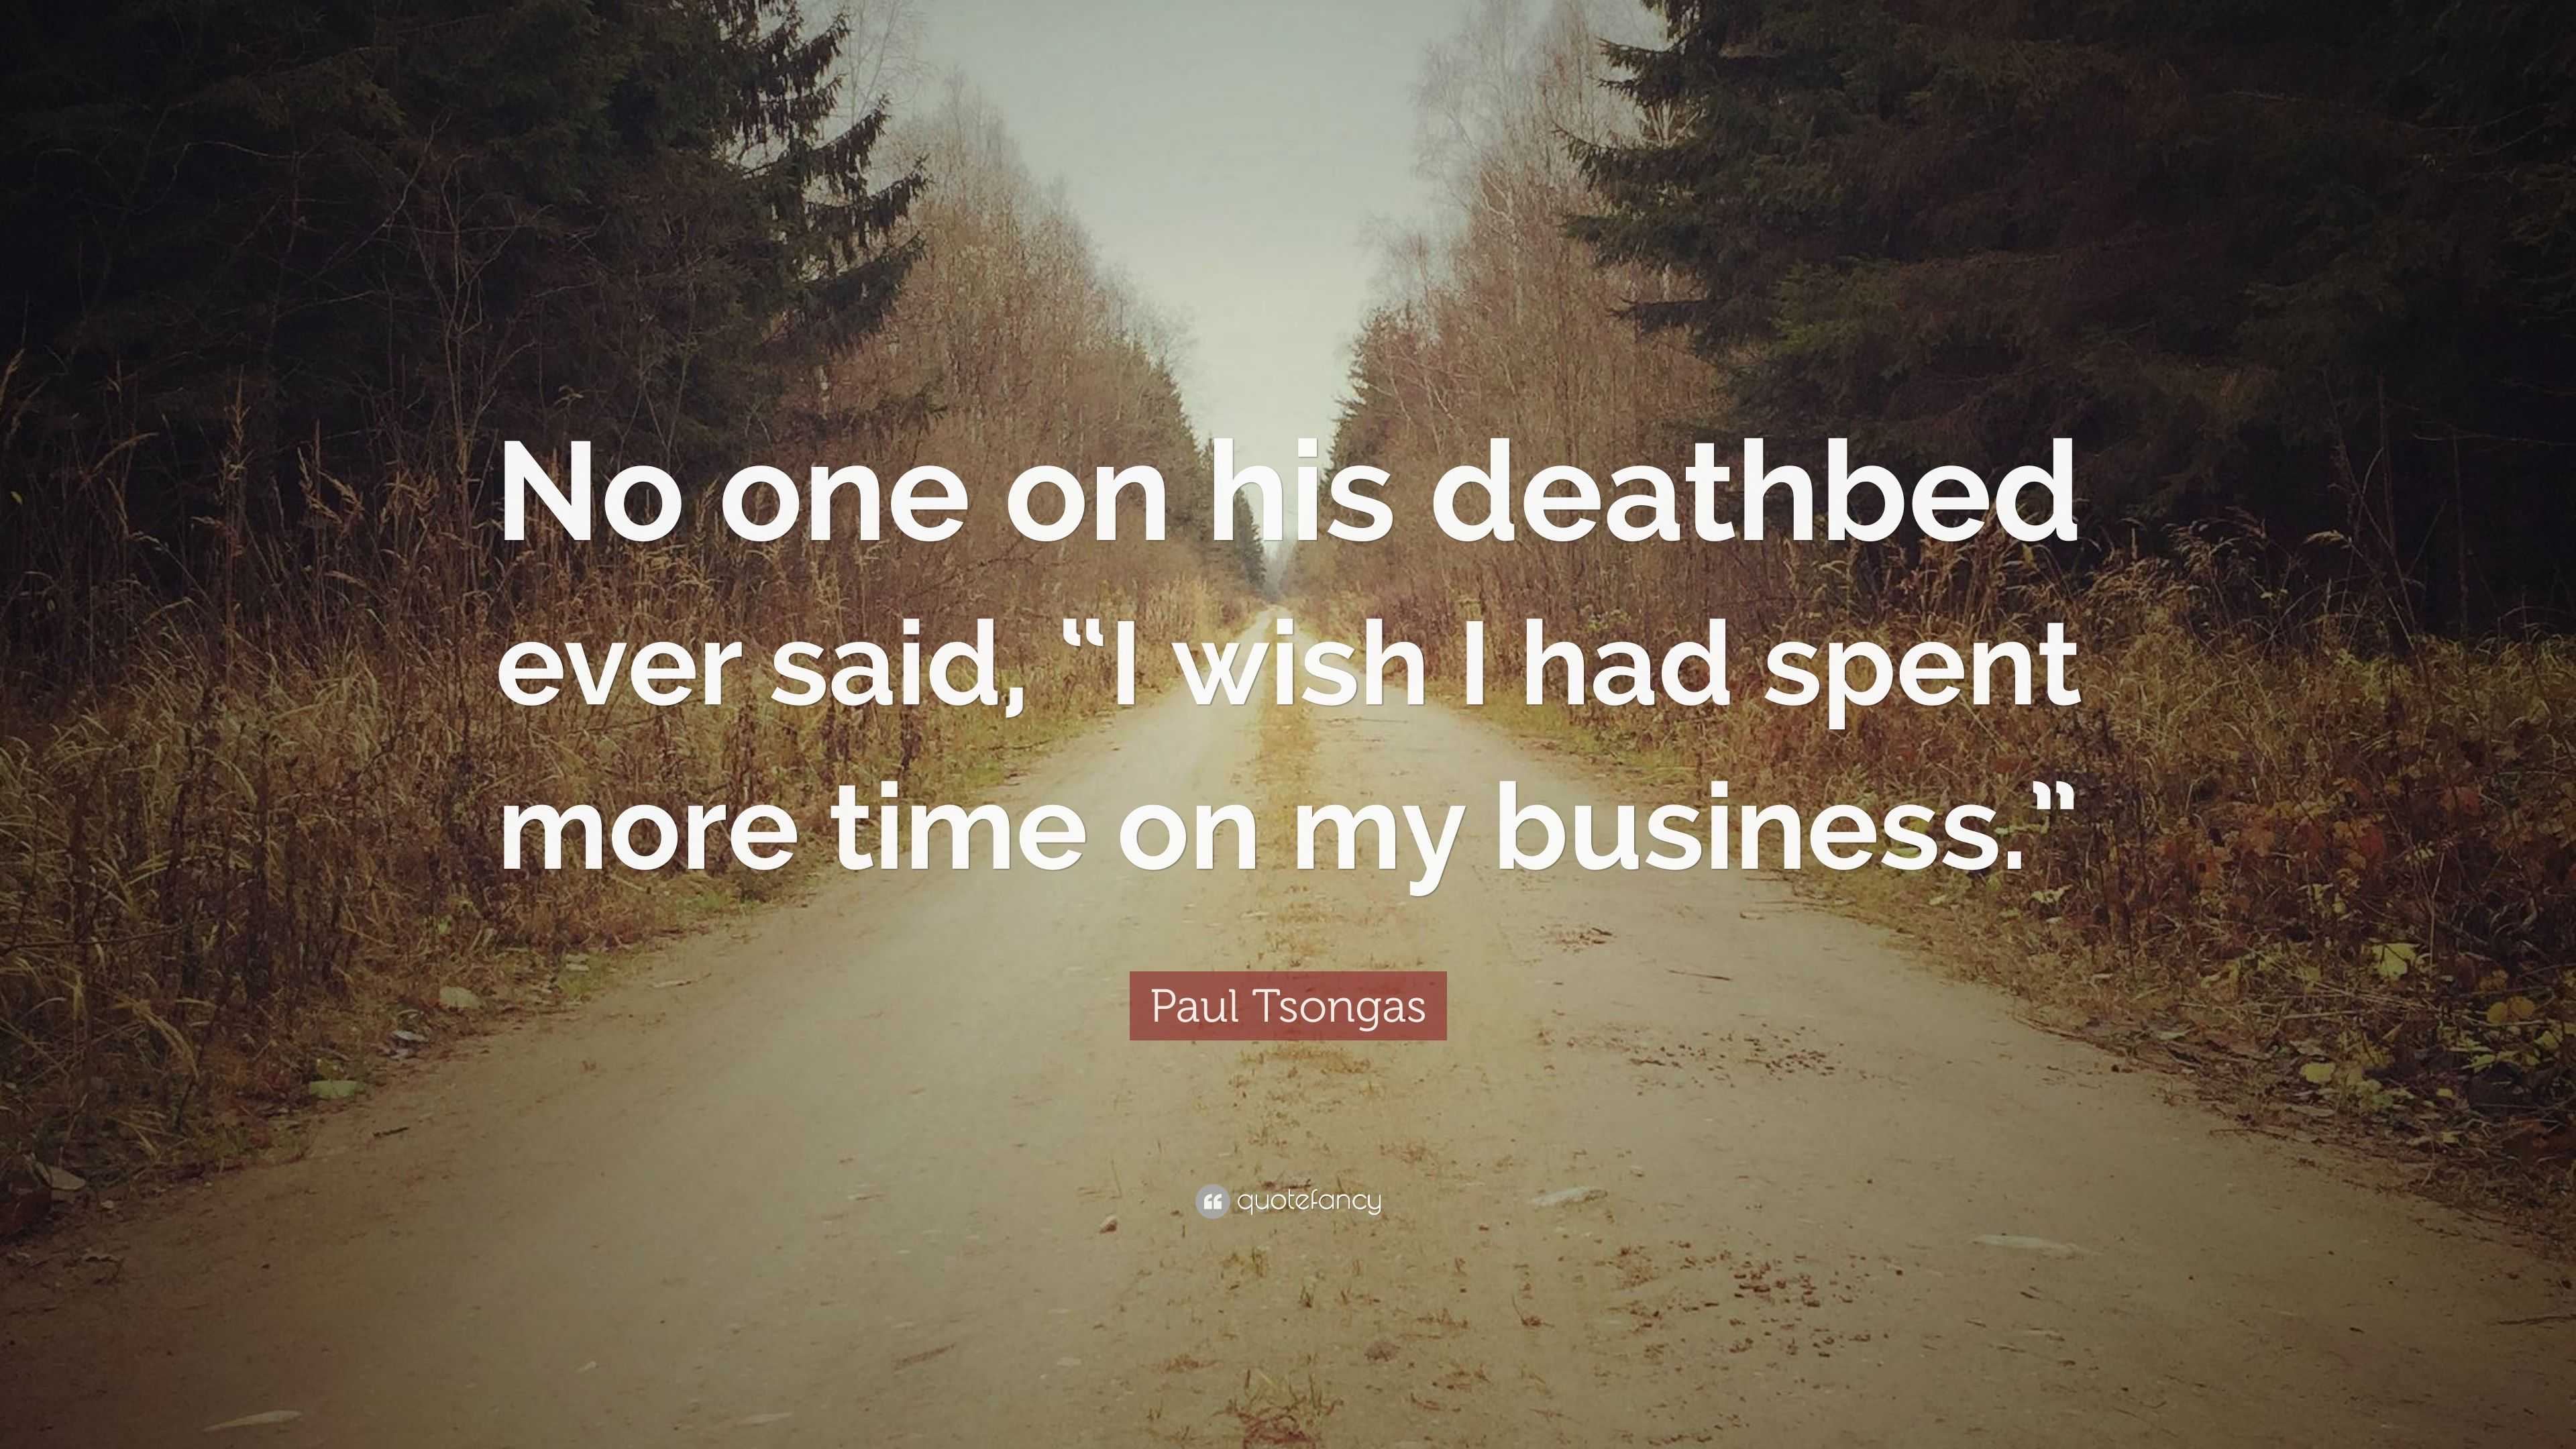 Paul Tsongas Quote: “No one on his deathbed ever said, “I wish I 